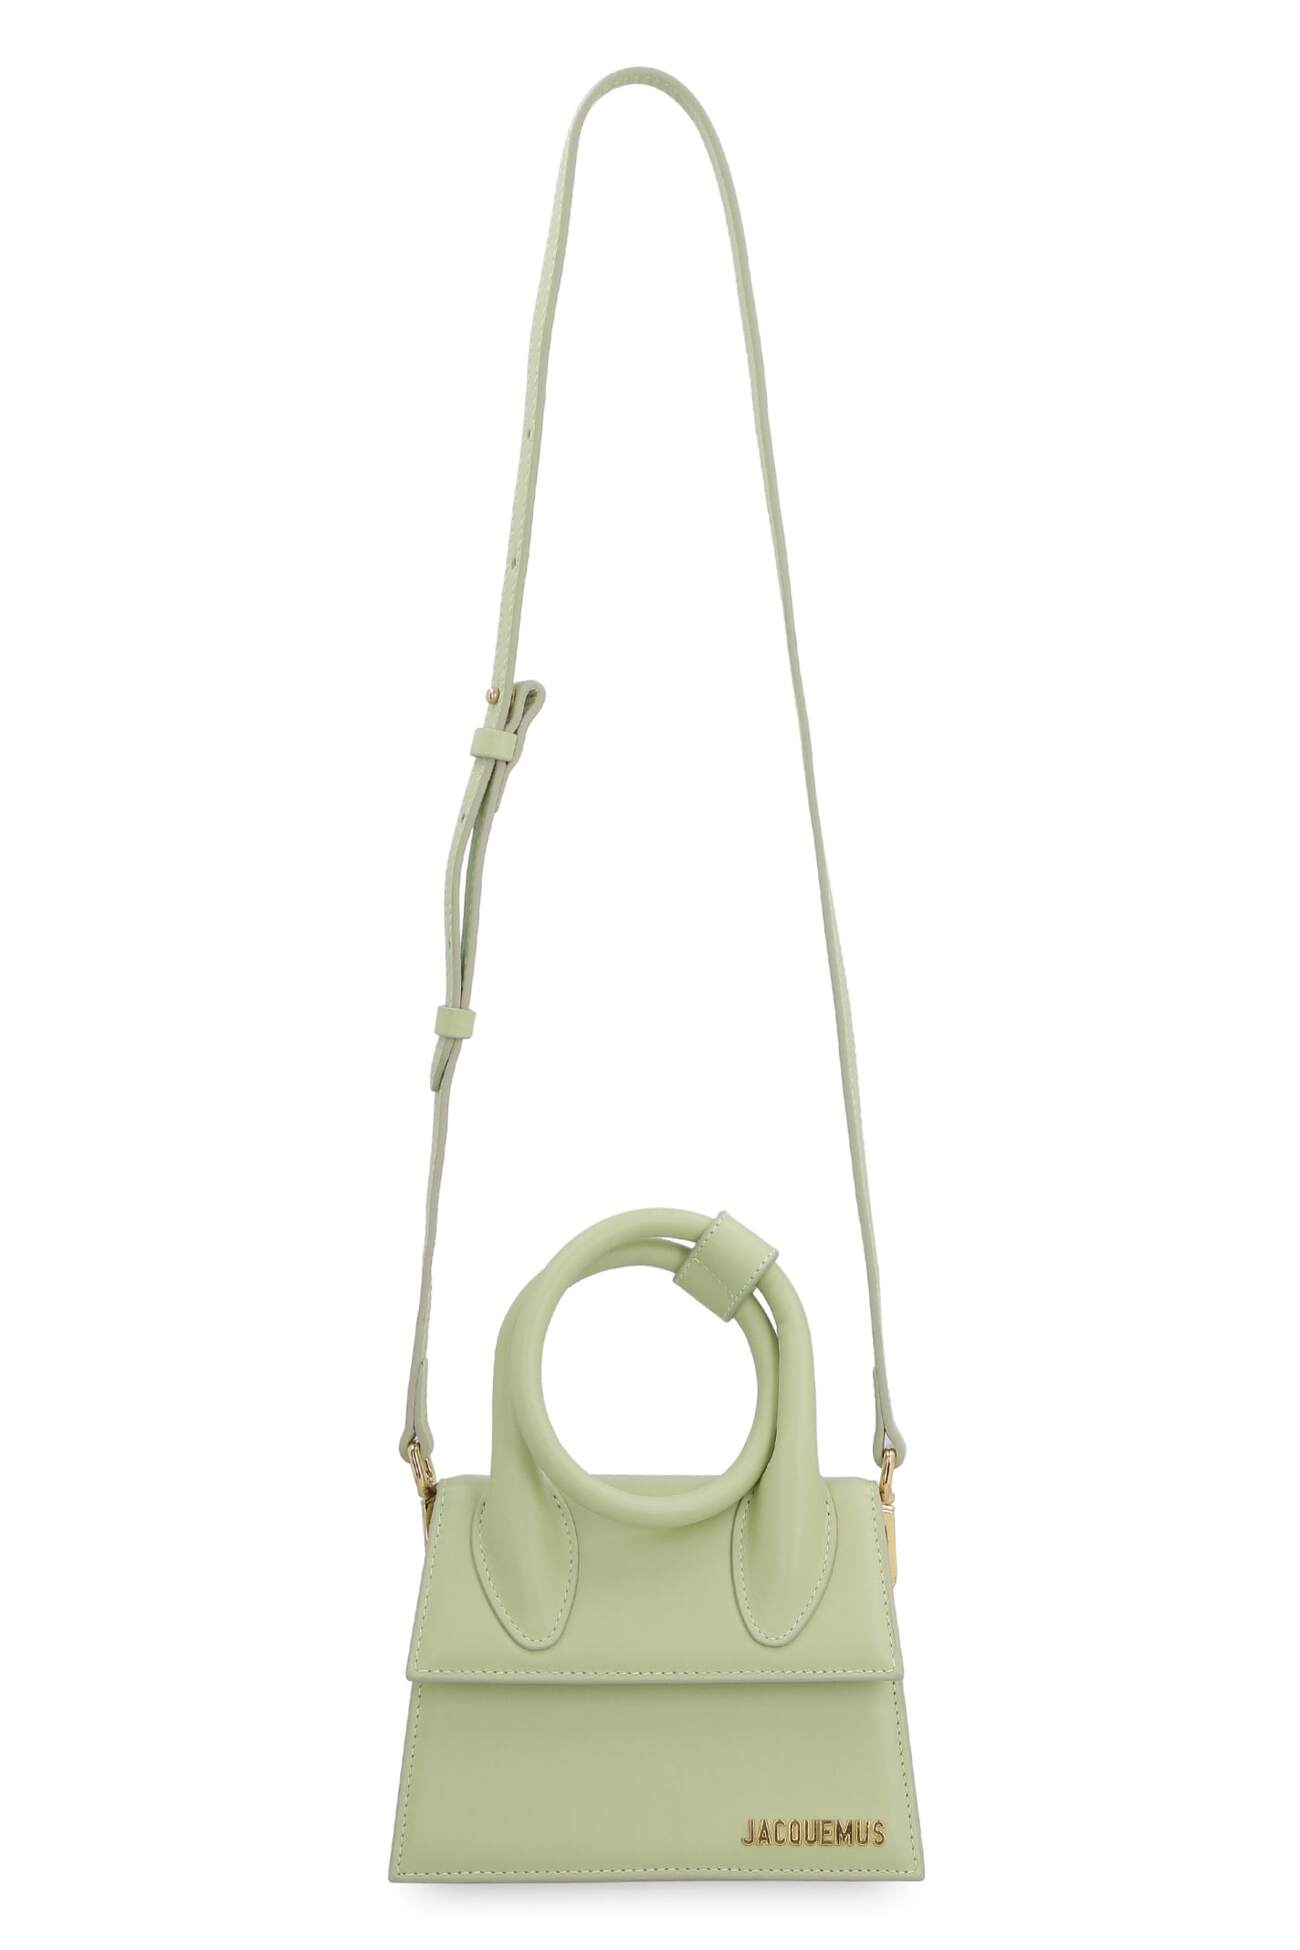 Jacquemus Le Chiquito Noeud Leather Handbag in green